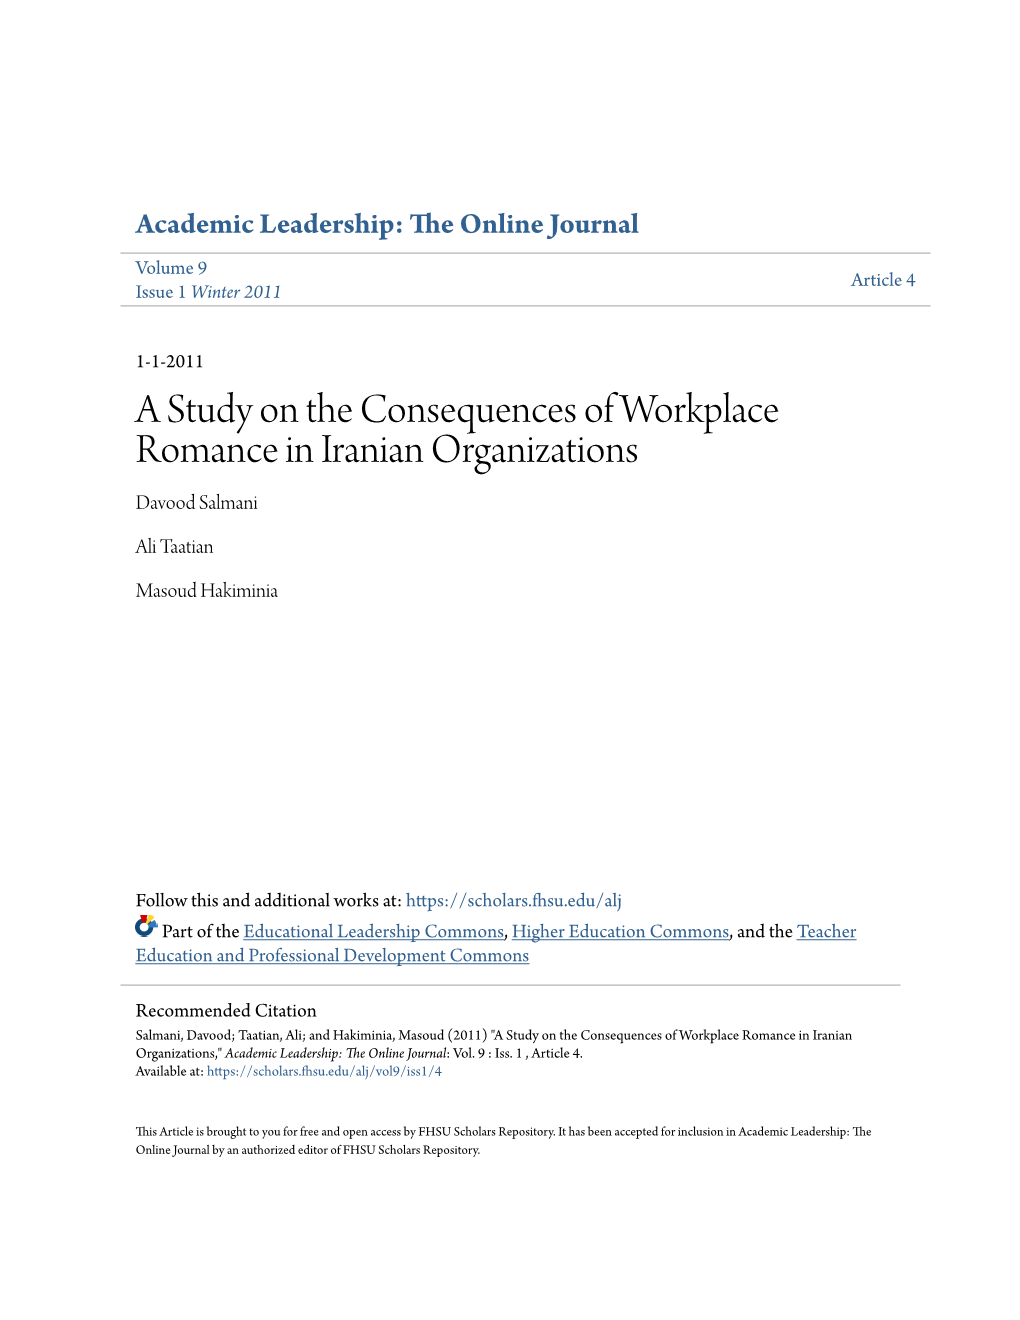 A Study on the Consequences of Workplace Romance in Iranian Organizations Davood Salmani